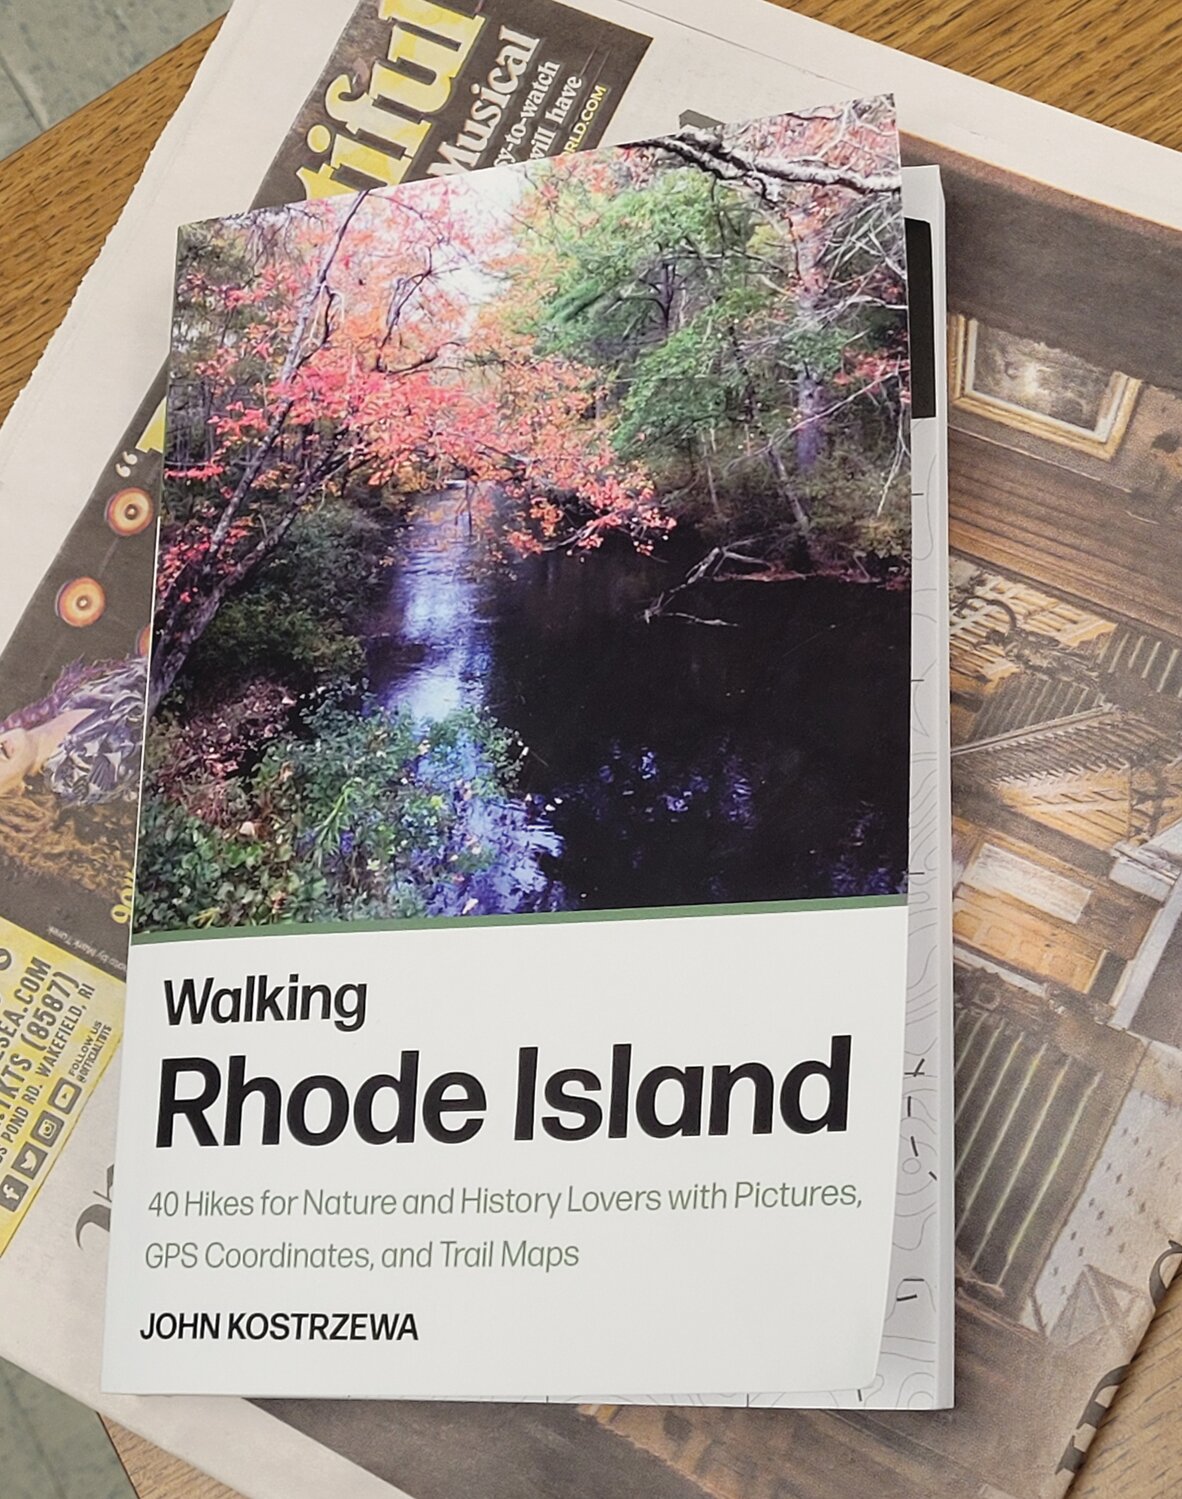 BUY THE BOOK: John Kostrzewa’s book, “Walking Rhode Island: 40 Hikes for Nature and History Lovers with Pictures, GPS Coordinates, and Trail Maps,” can be purchased on Amazon or at the Beacon Communications office, 1944 Warwick Ave., Warwick.